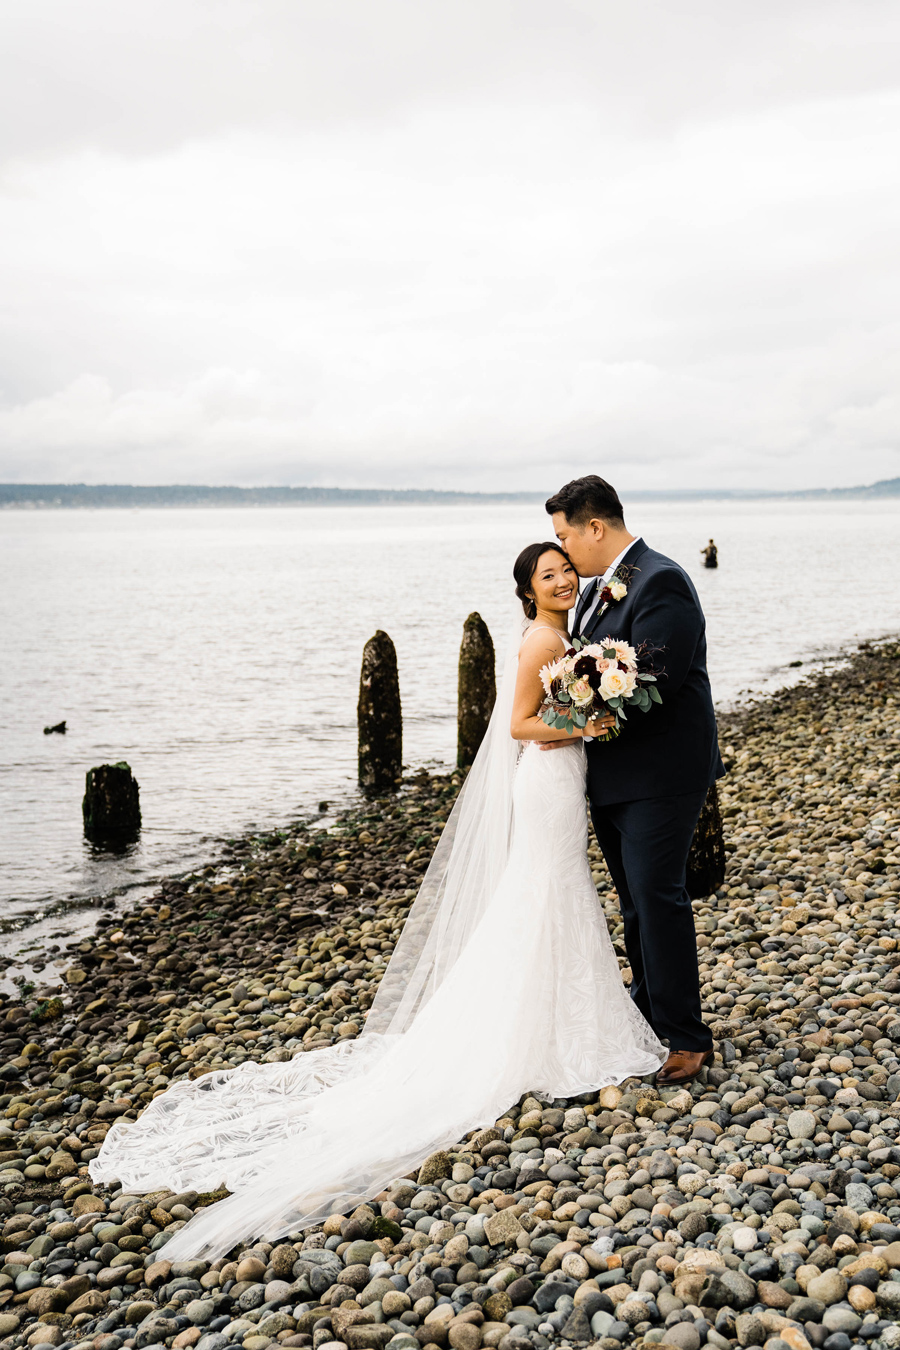 A bride and groom snuggle together on a beach on their wedding day near Seattle